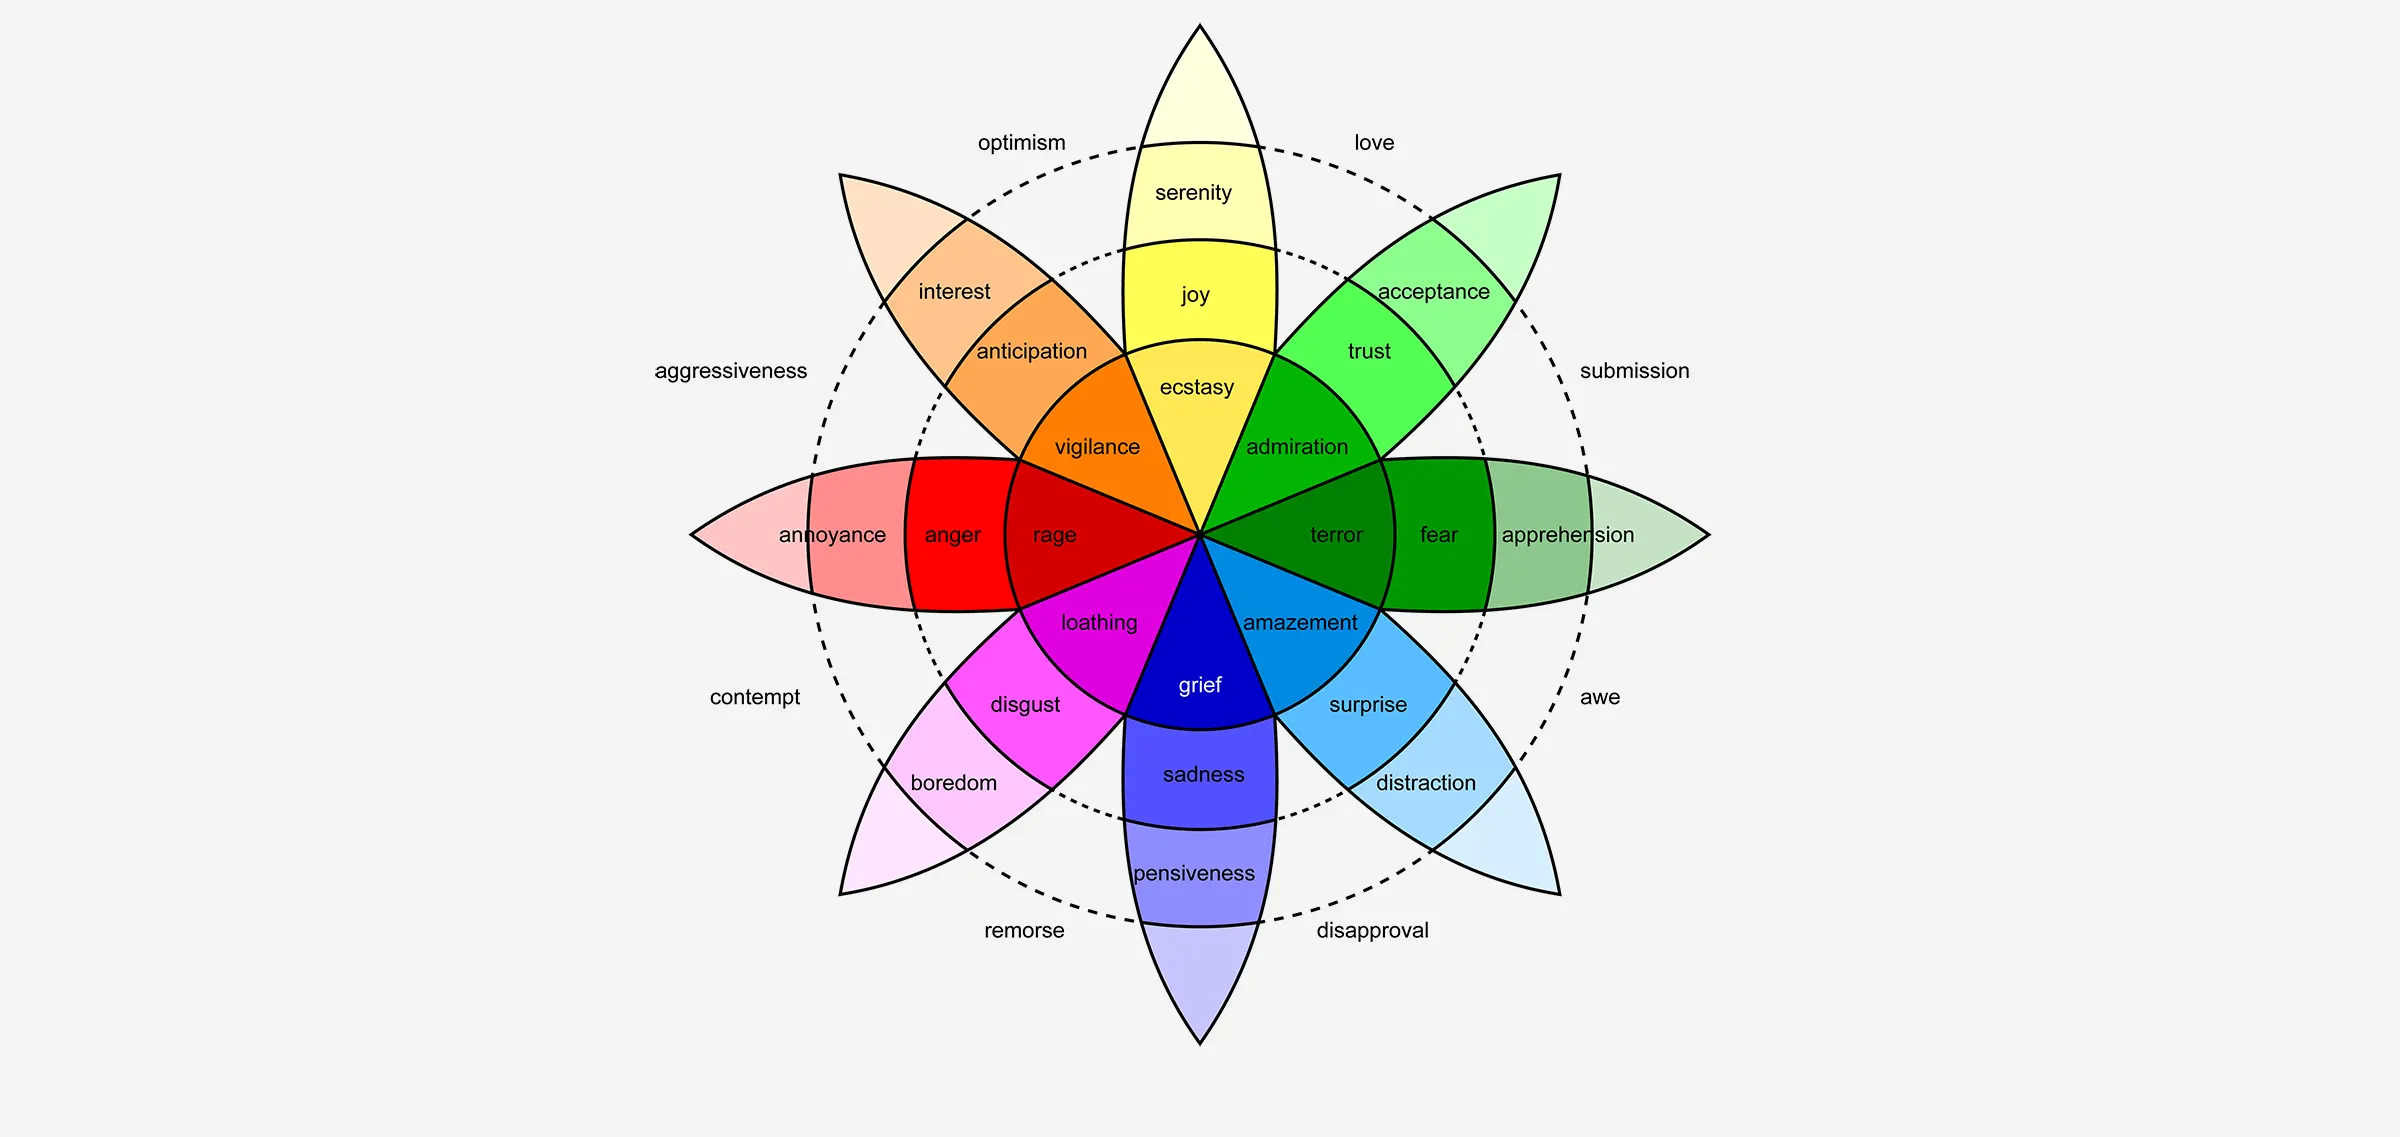 Plutchik proposed the wheel of emotions.